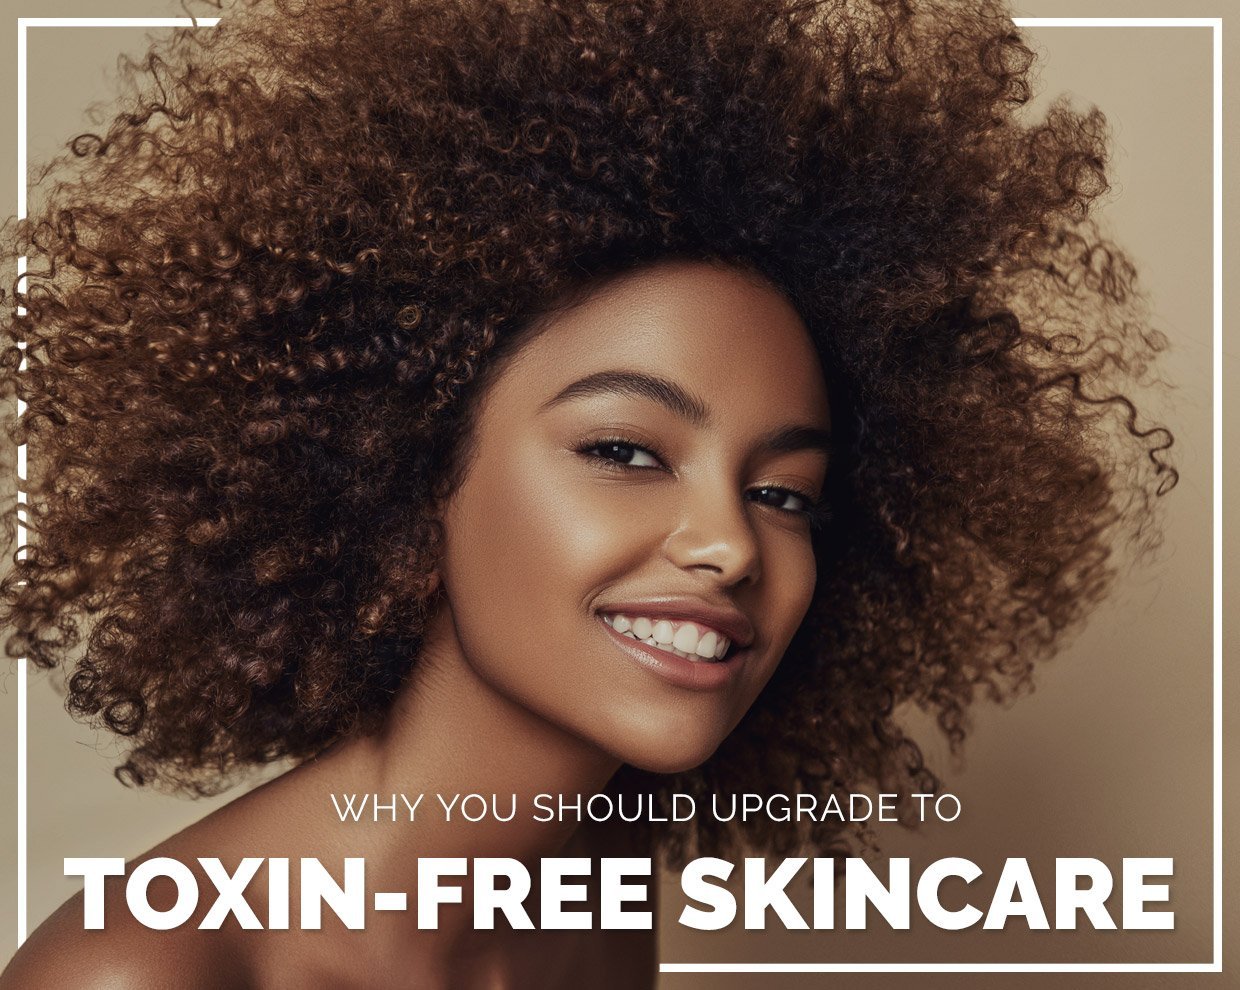 Why you should upgrade to toxin-free skincare 